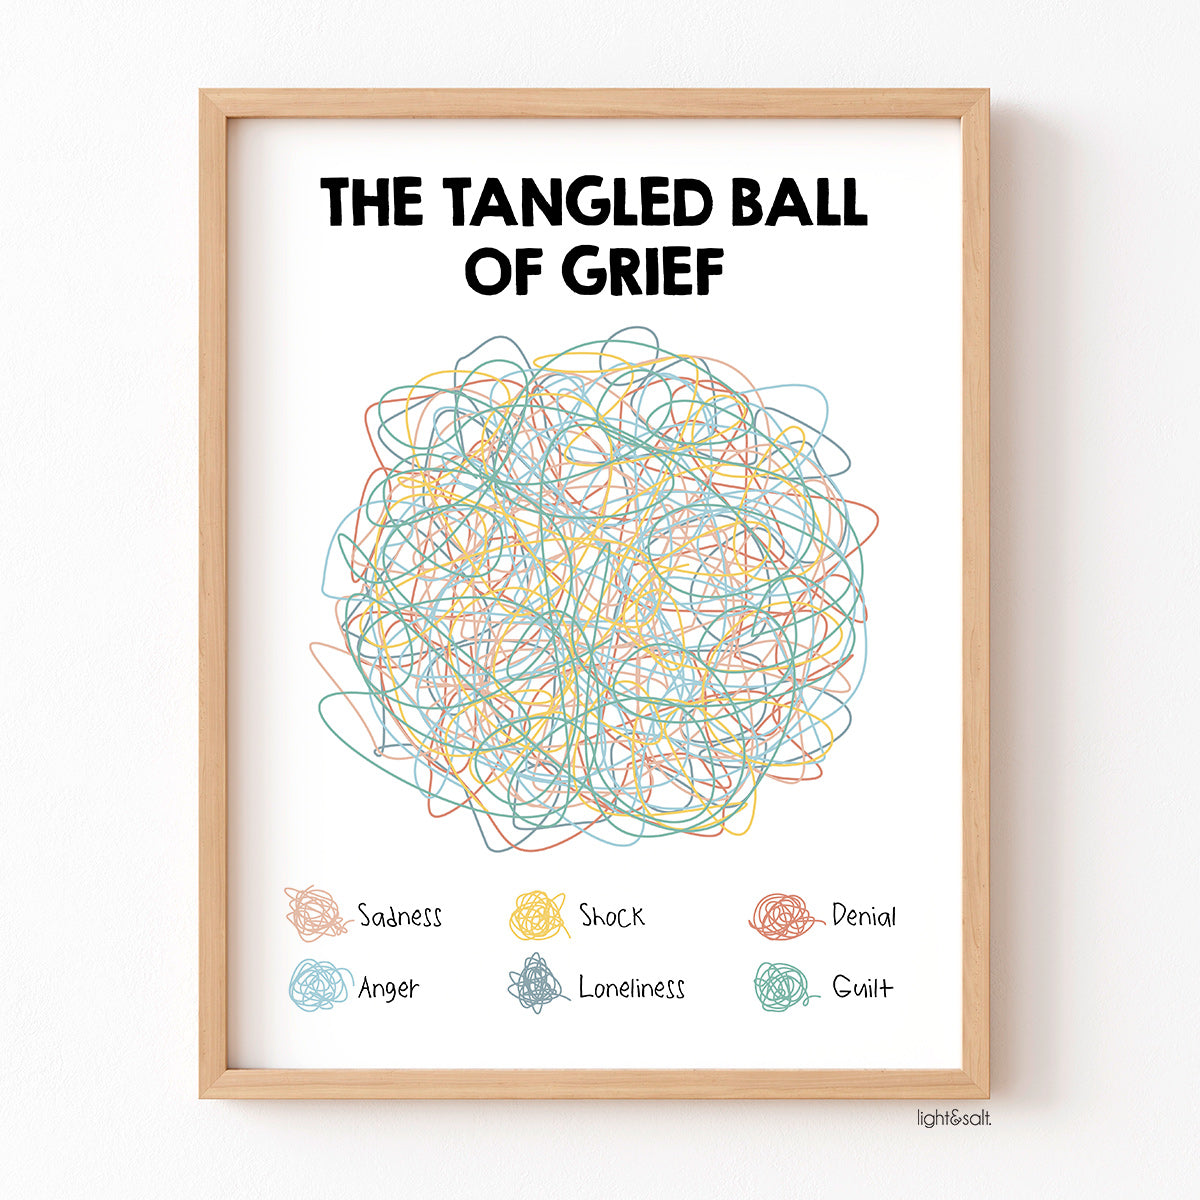 The tangled ball of grief poster